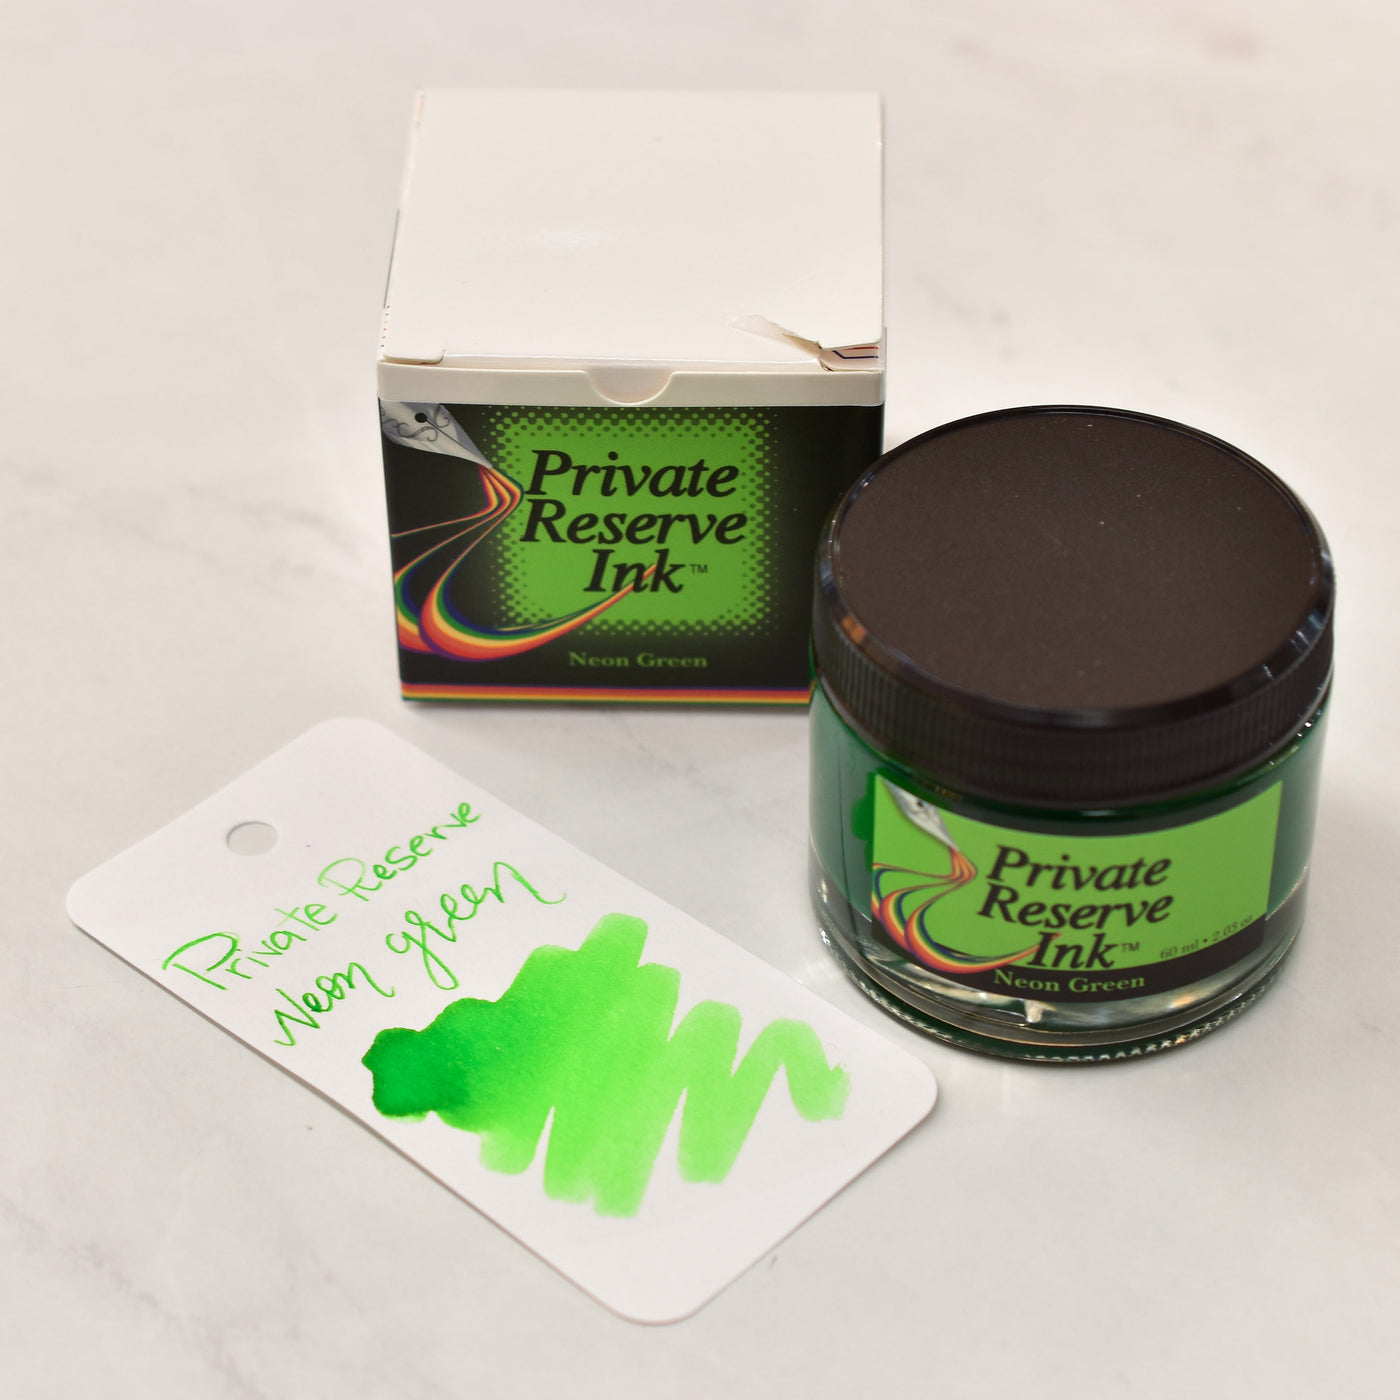 Private Reserve Neon Green Ink Bottle